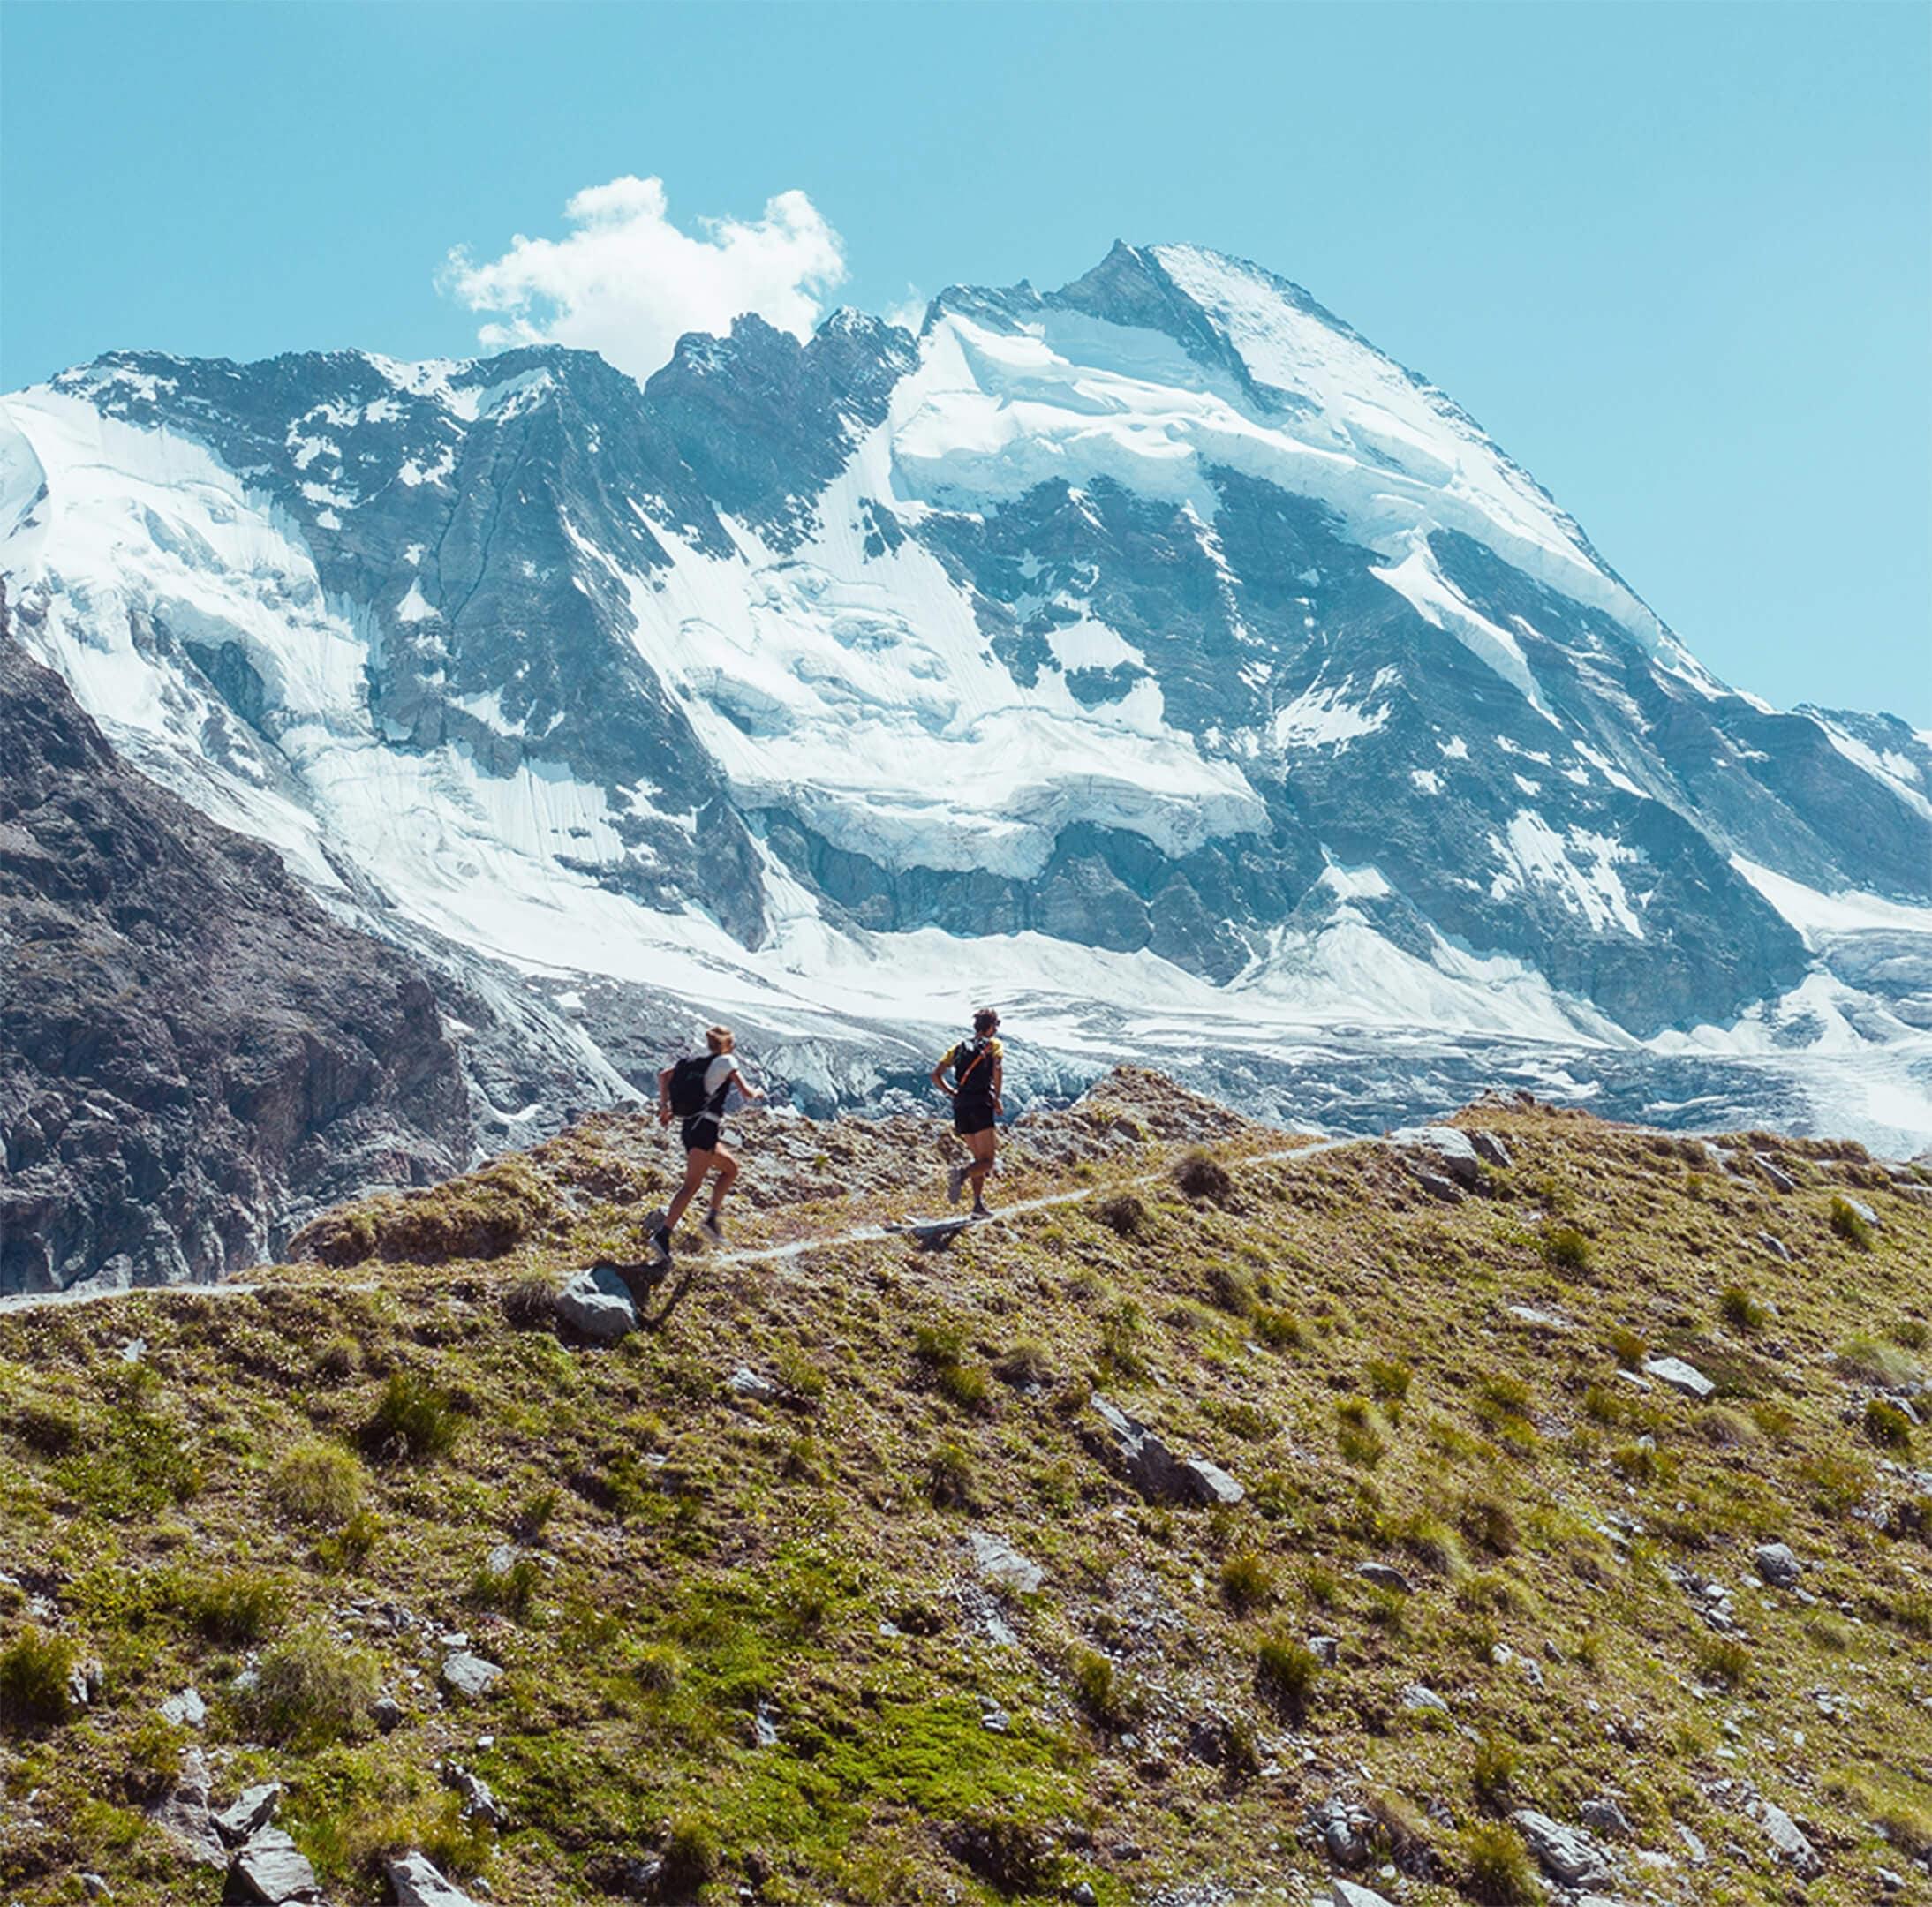 Two people jogging on a trail with a snowy mountain peak in the background